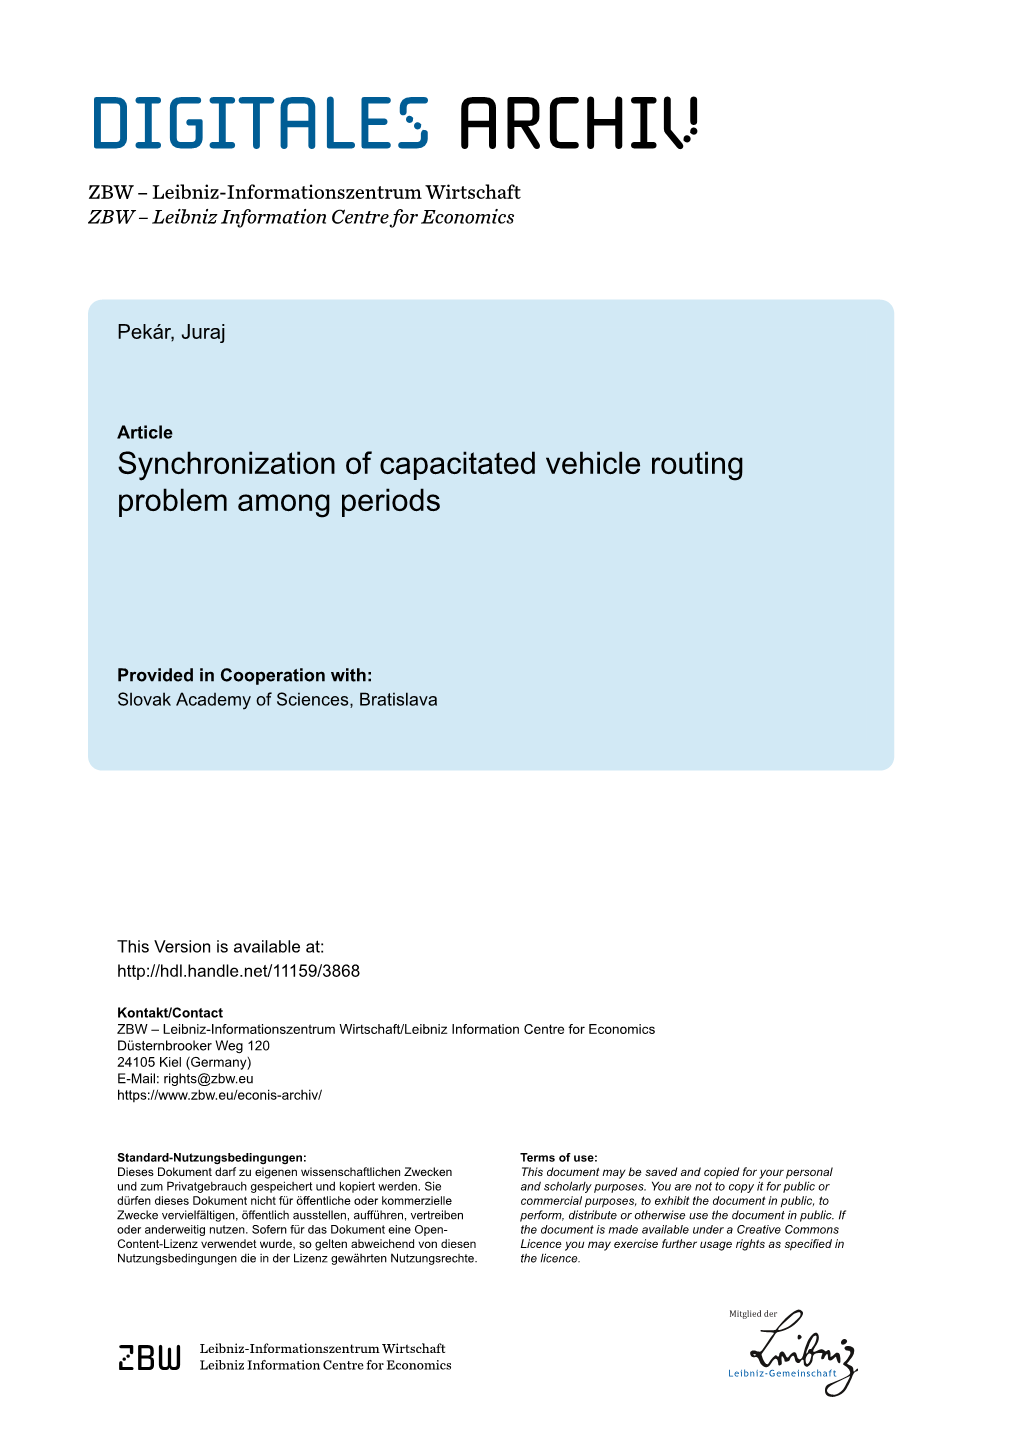 Synchronization of Capacitated Vehicle Routing Problem Among Periods